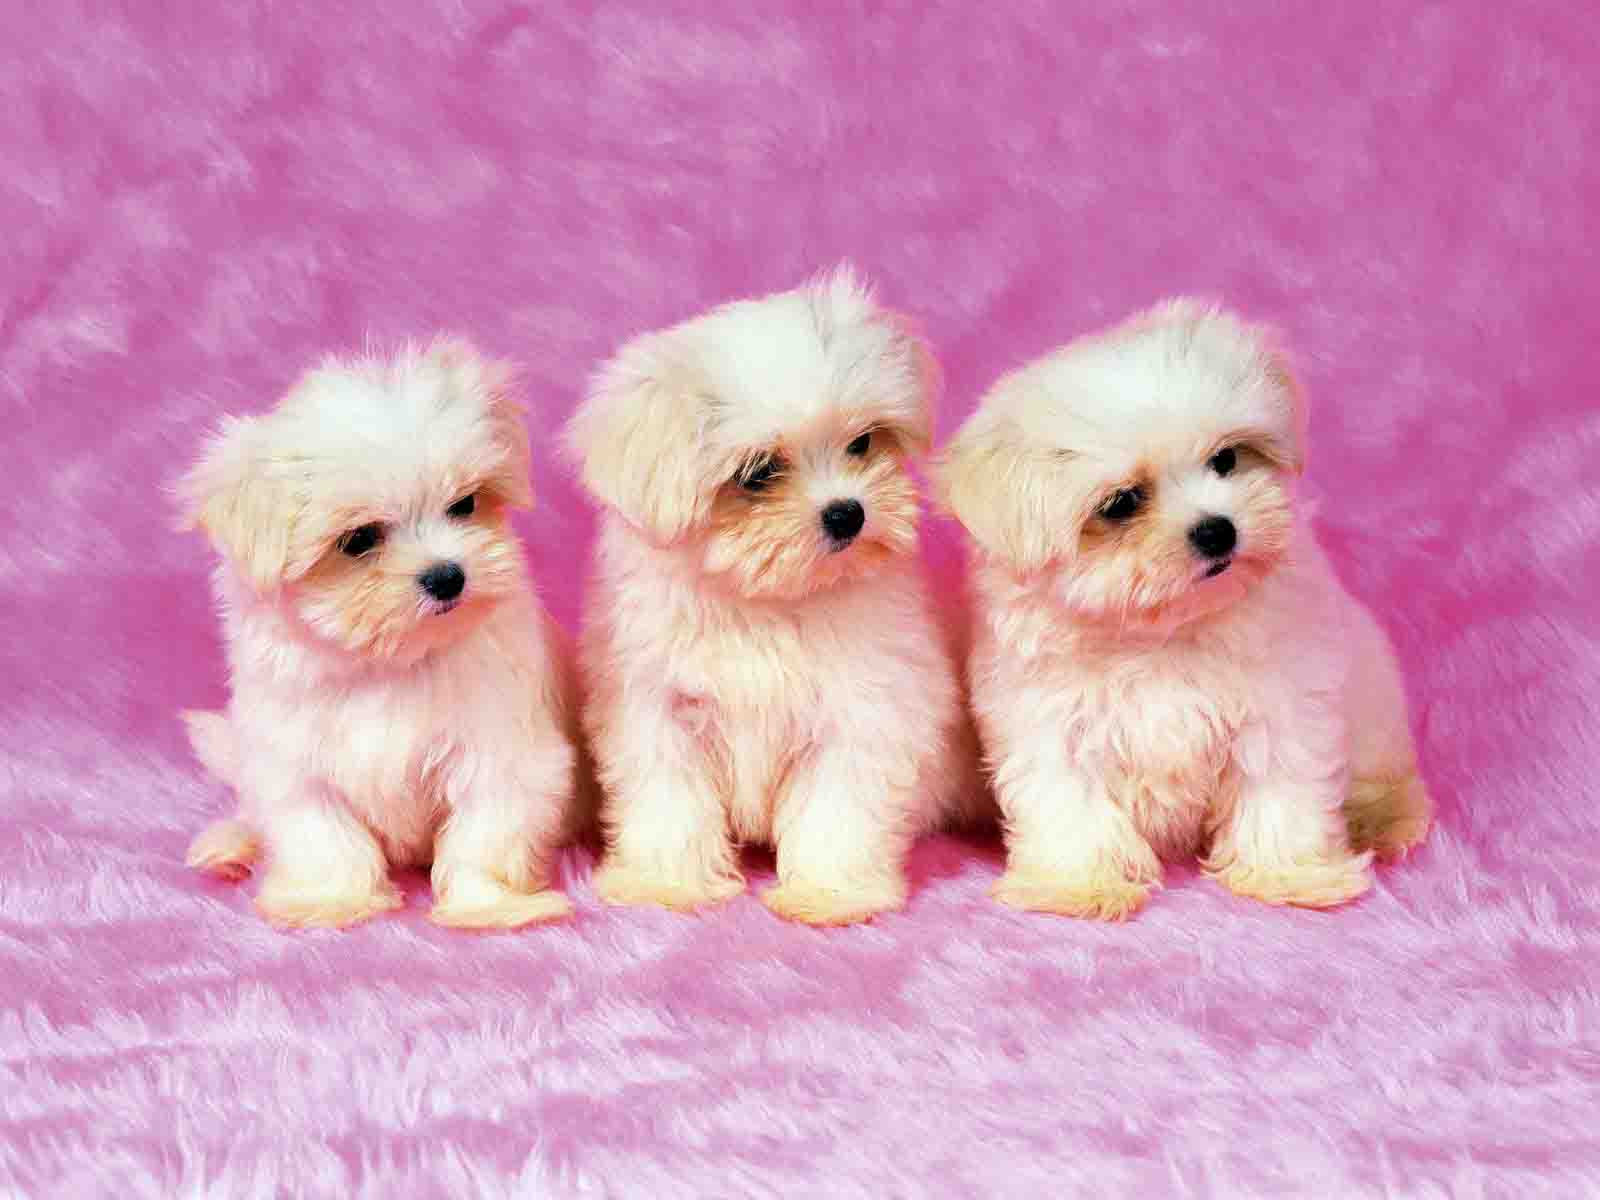 Funny and Cute: CUTE PUPPY HD WALLPAPERS, cute wallpapers desktop